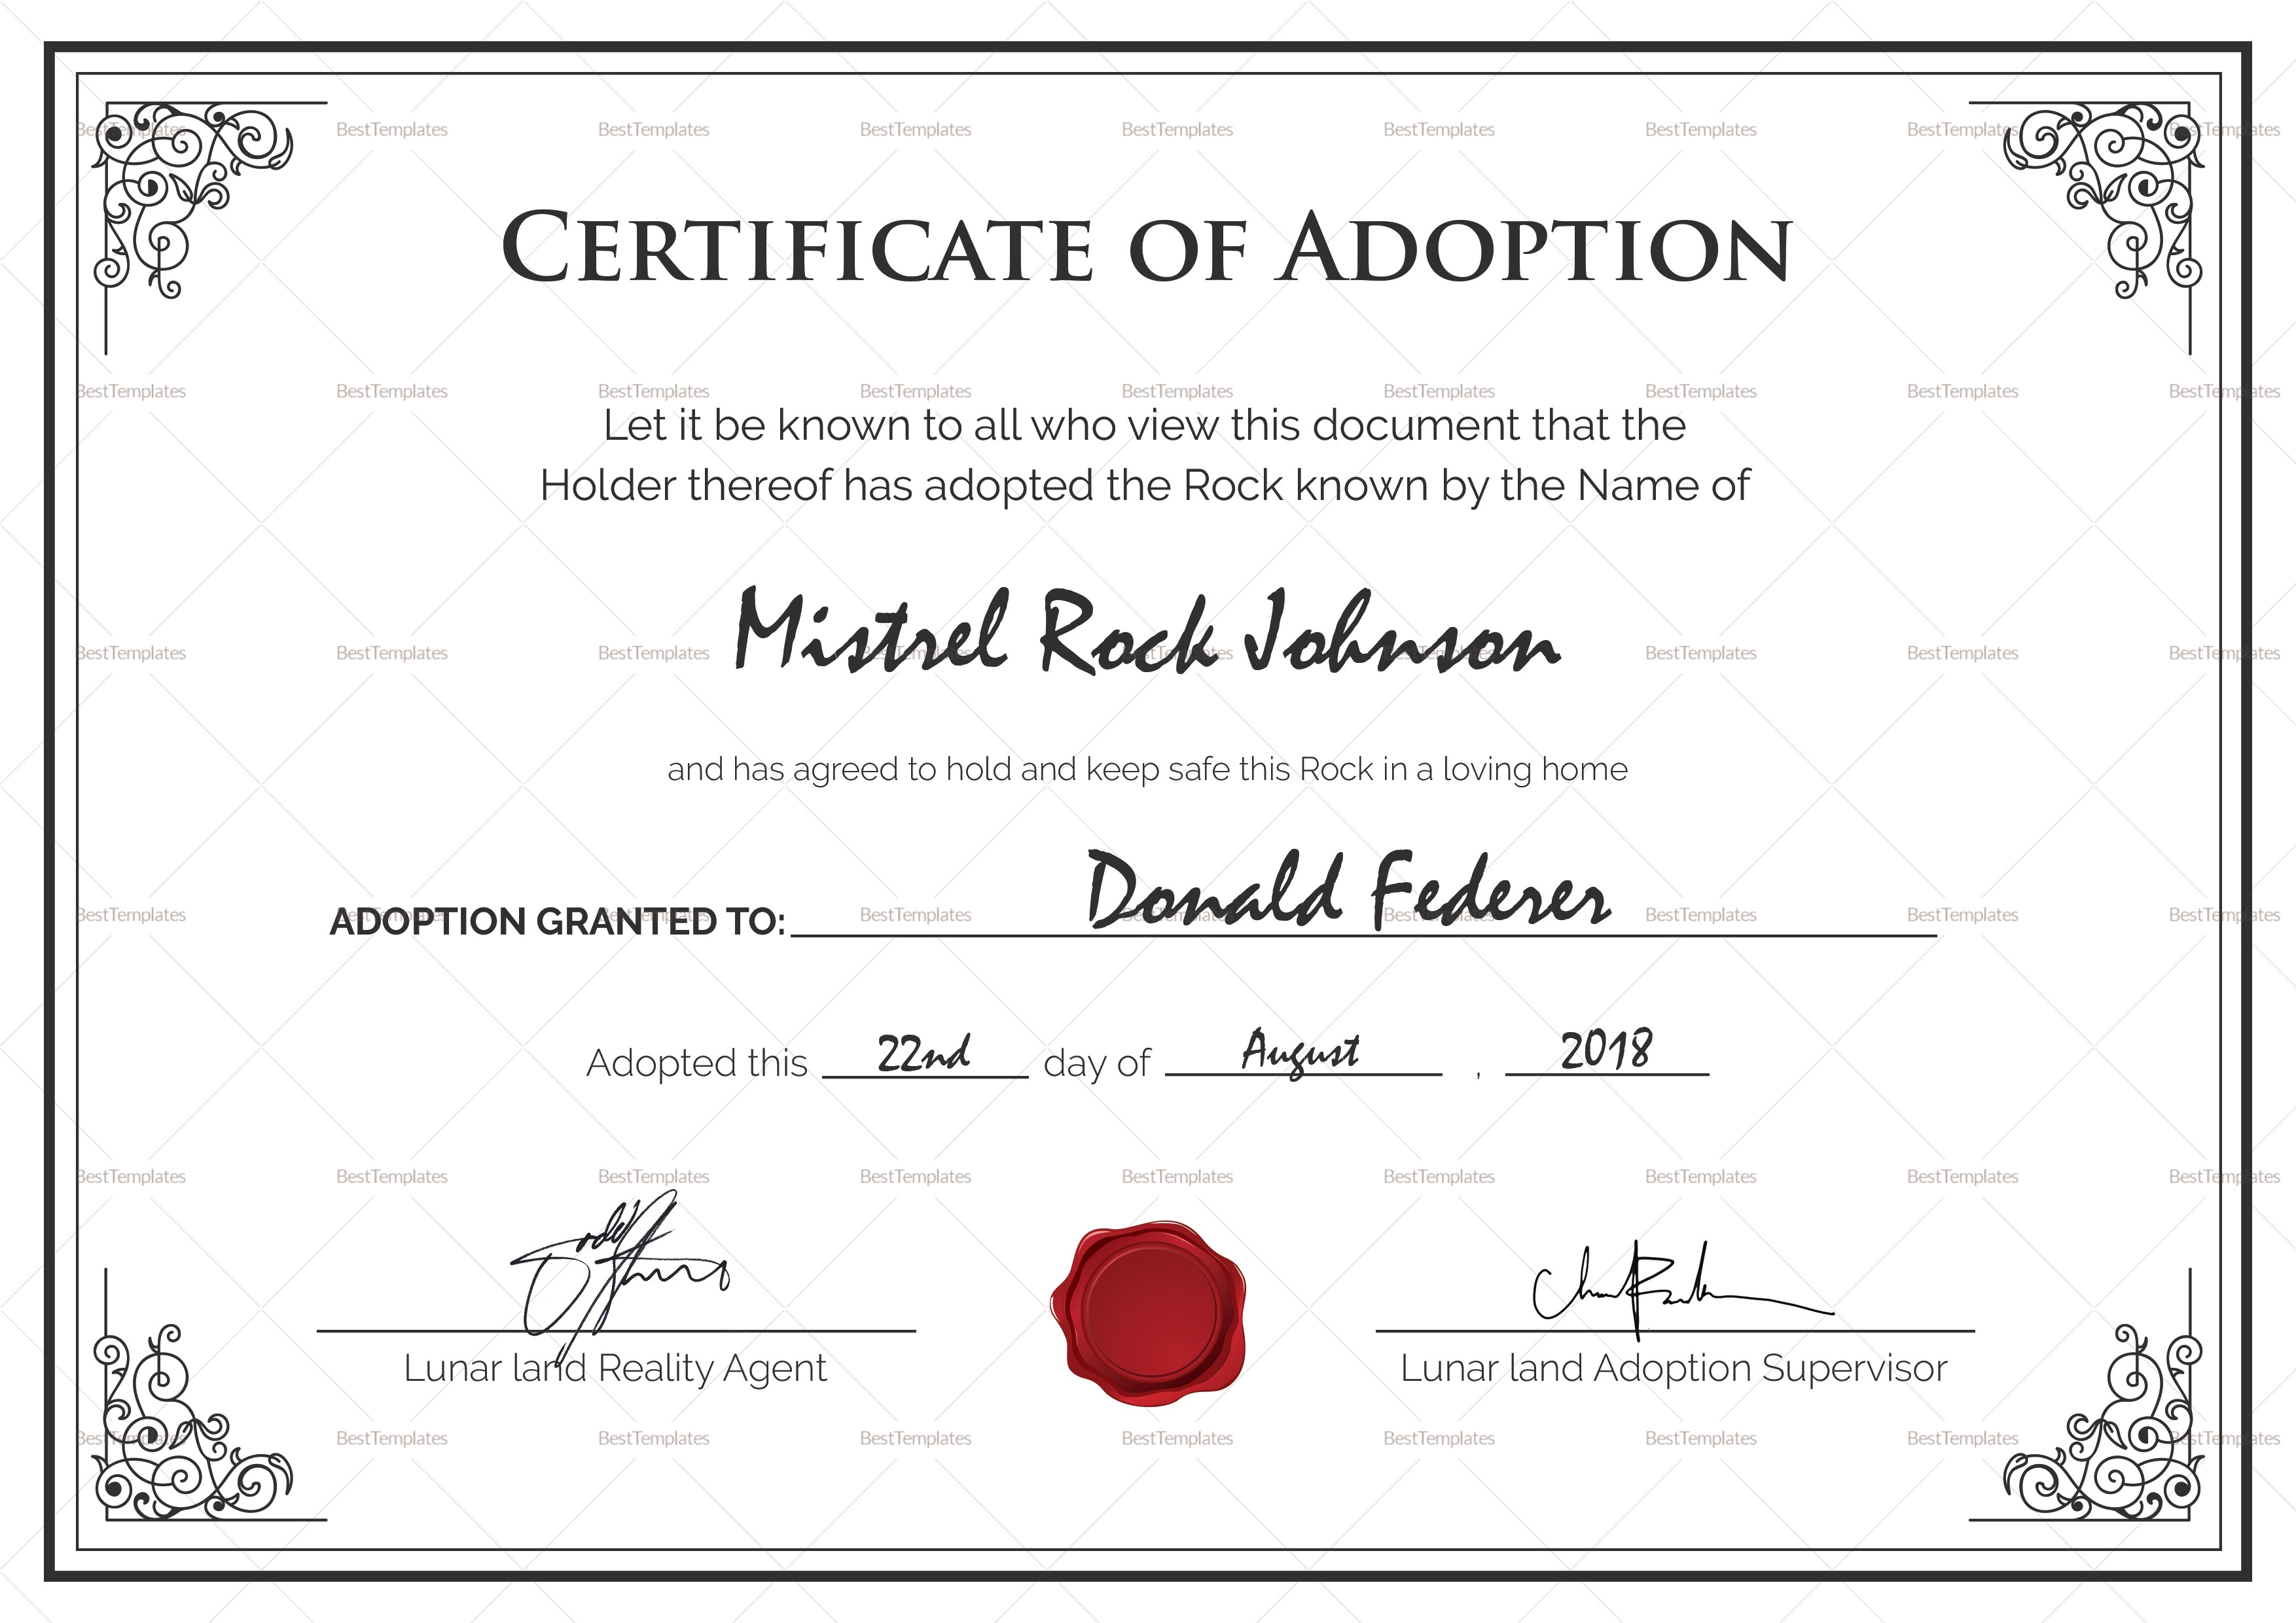 Blank Adoption Certificate Template - Demir.iso-Consulting.co - Fake Adoption Certificate Free Printable